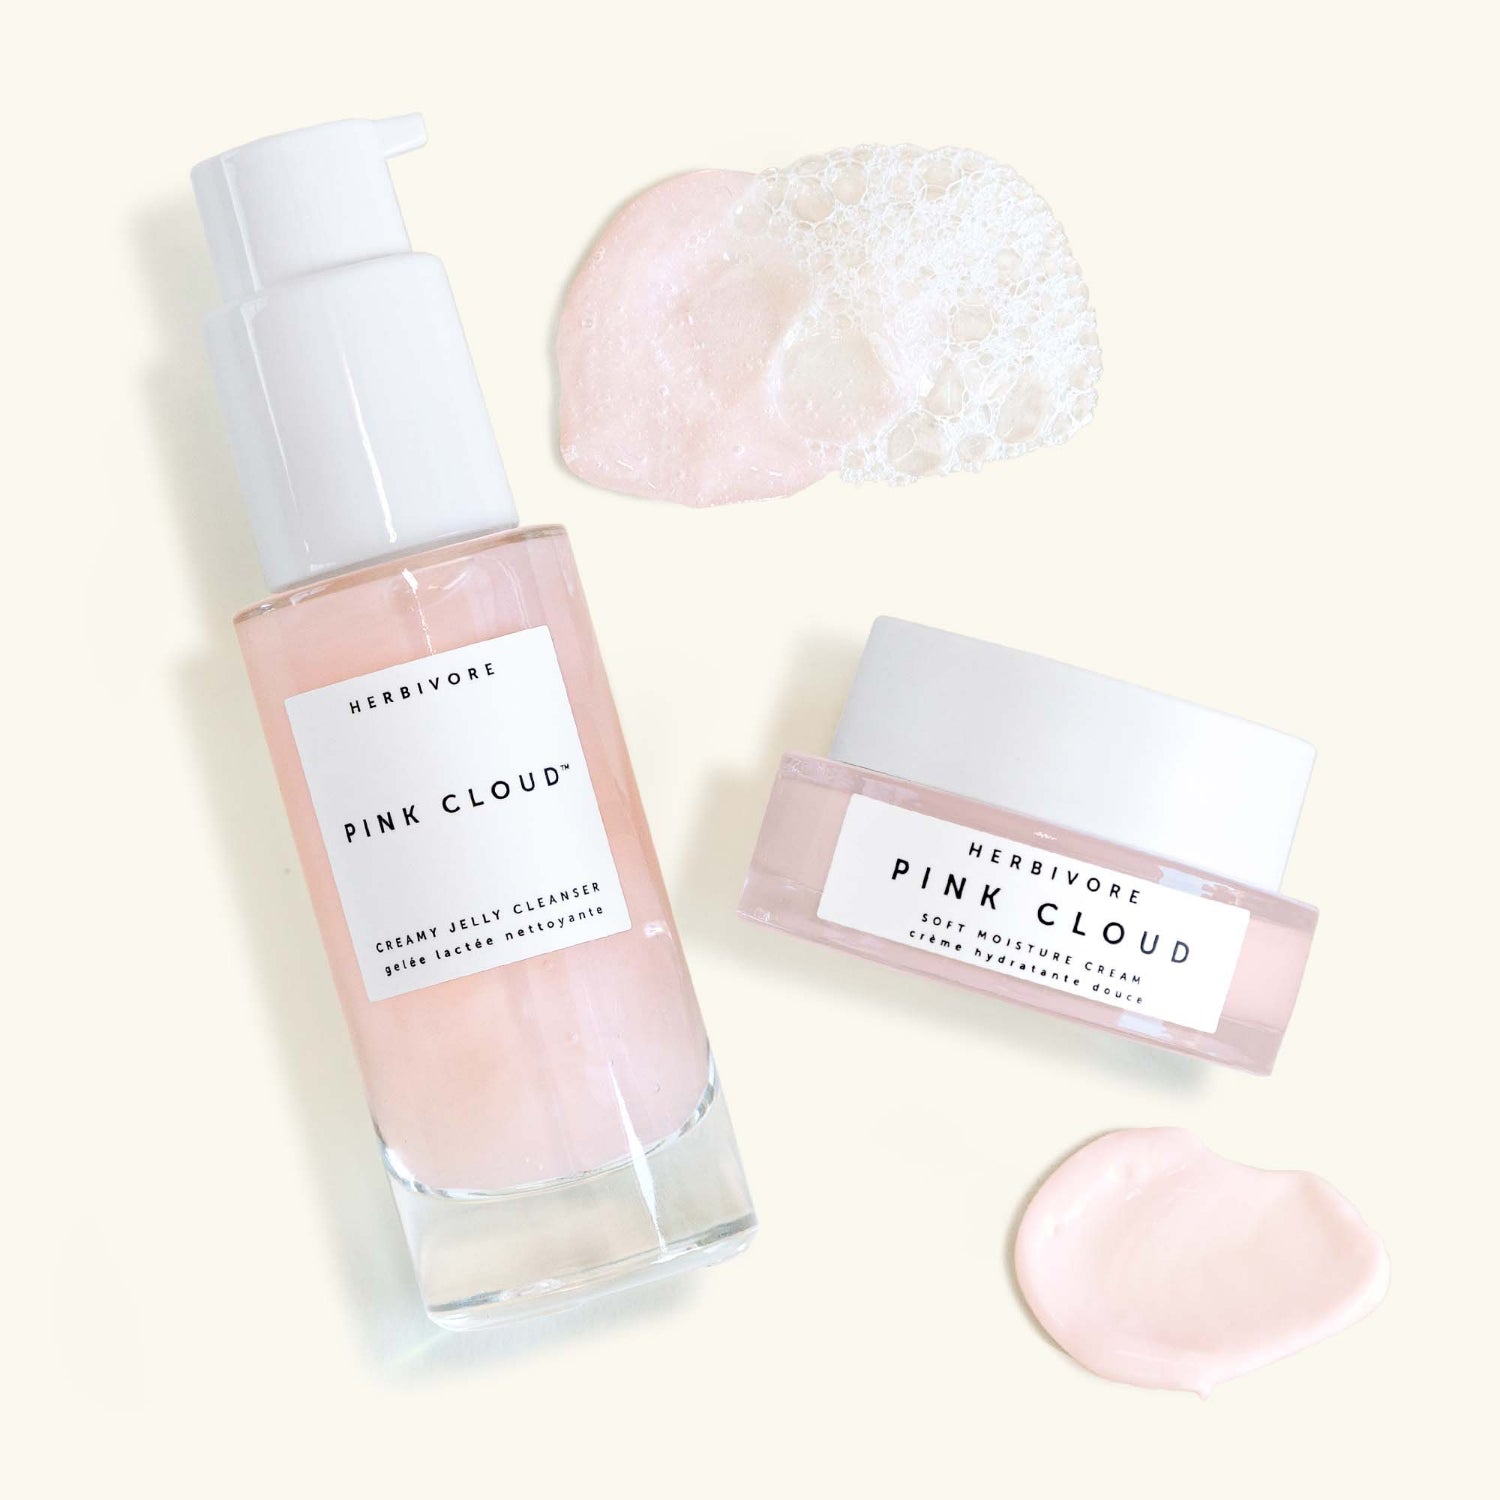 Mini Pink Cloud Cleanser and Pink Cloud Cream with product smears